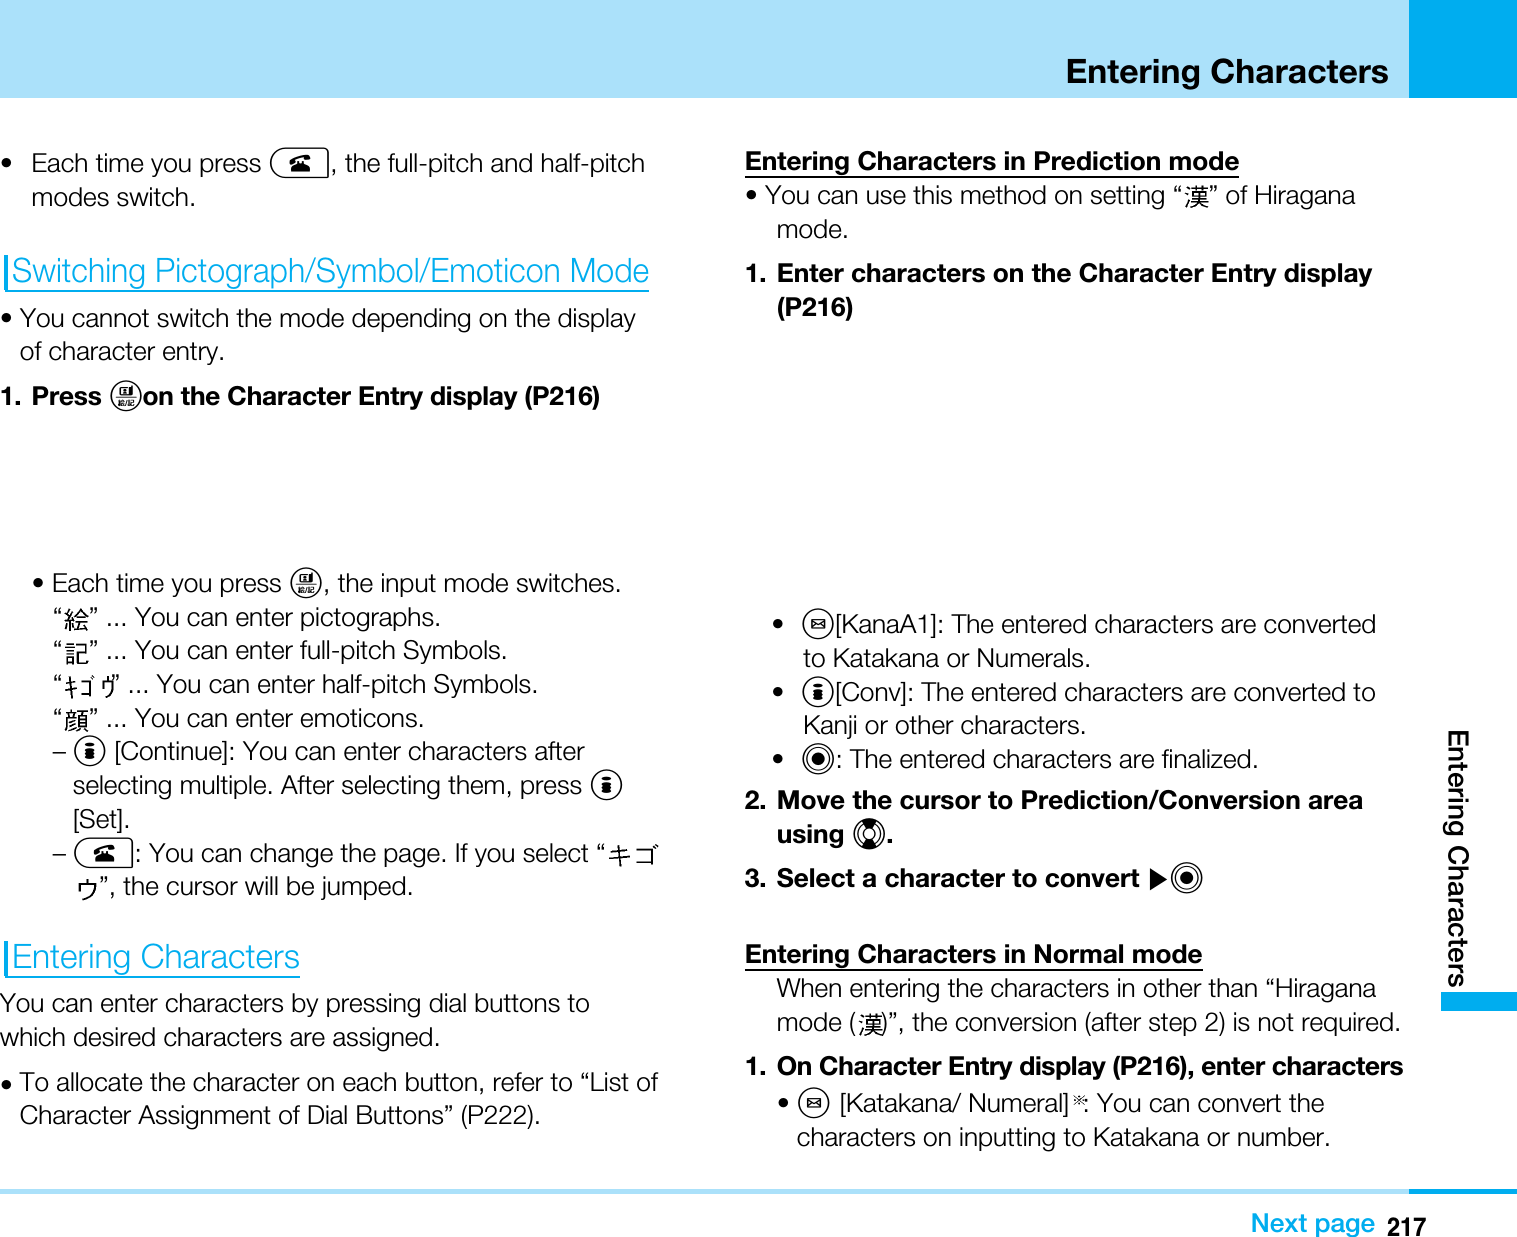 217Entering CharactersEntering CharactersNext page• Each time you press A, the full-pitch and half-pitchmodes switch.Switching Pictograph/Symbol/Emoticon Mode• You cannot switch the mode depending on the displayof character entry.1. Press Ton the Character Entry display (P216)• Each time you press T, the input mode switches.“” ... You can enter pictographs.“” ... You can enter full-pitch Symbols.“” ... You can enter half-pitch Symbols.“” ... You can enter emoticons.–I[Continue]: You can enter characters afterselecting multiple. After selecting them, press I[Set].–A: You can change the page. If you select “”, the cursor will be jumped.Entering CharactersYou can enter characters by pressing dial buttons towhich desired characters are assigned.•To allocate the character on each button, refer to “List ofCharacter Assignment of Dial Buttons” (P222).Entering Characters in Prediction mode• You can use this method on setting “ ” of Hiraganamode.1. Enter characters on the Character Entry display(P216)•M[KanaA1]: The entered characters are convertedto Katakana or Numerals.•I[Conv]: The entered characters are converted toKanji or other characters.•C: The entered characters are finalized.2. Move the cursor to Prediction/Conversion areausing H.3. Select a character to convert ]CEntering Characters in Normal modeWhen entering the characters in other than “Hiraganamode ( )”, the conversion (after step 2) is not required.1. On Character Entry display (P216), enter characters•M[Katakana/ Numeral] : You can convert thecharacters on inputting to Katakana or number.